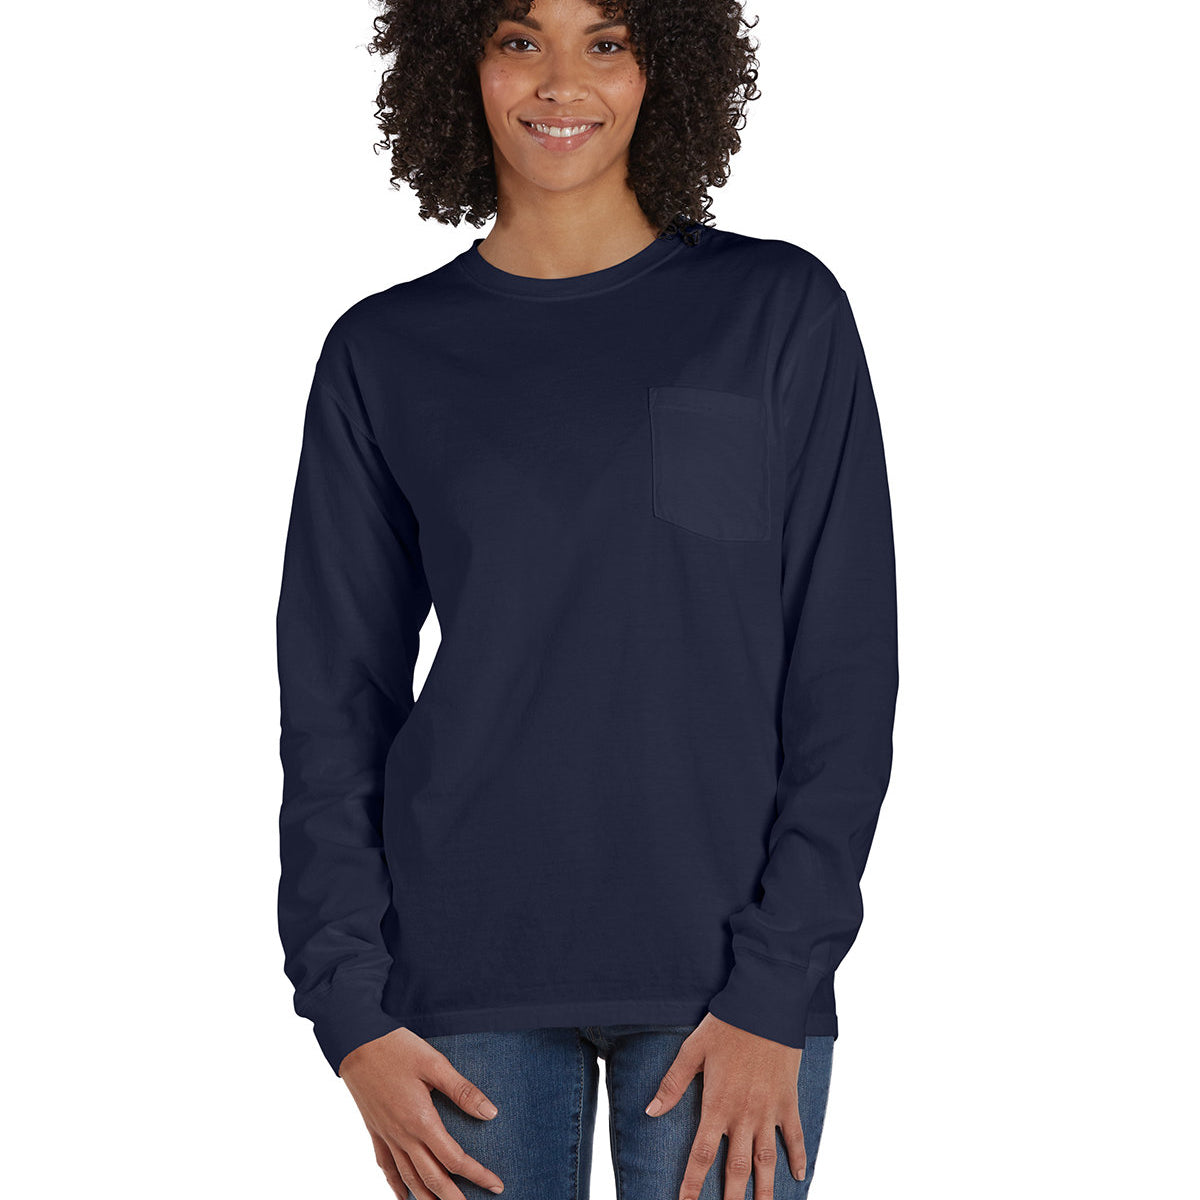 GDH250-CWH-54-NAVY-S